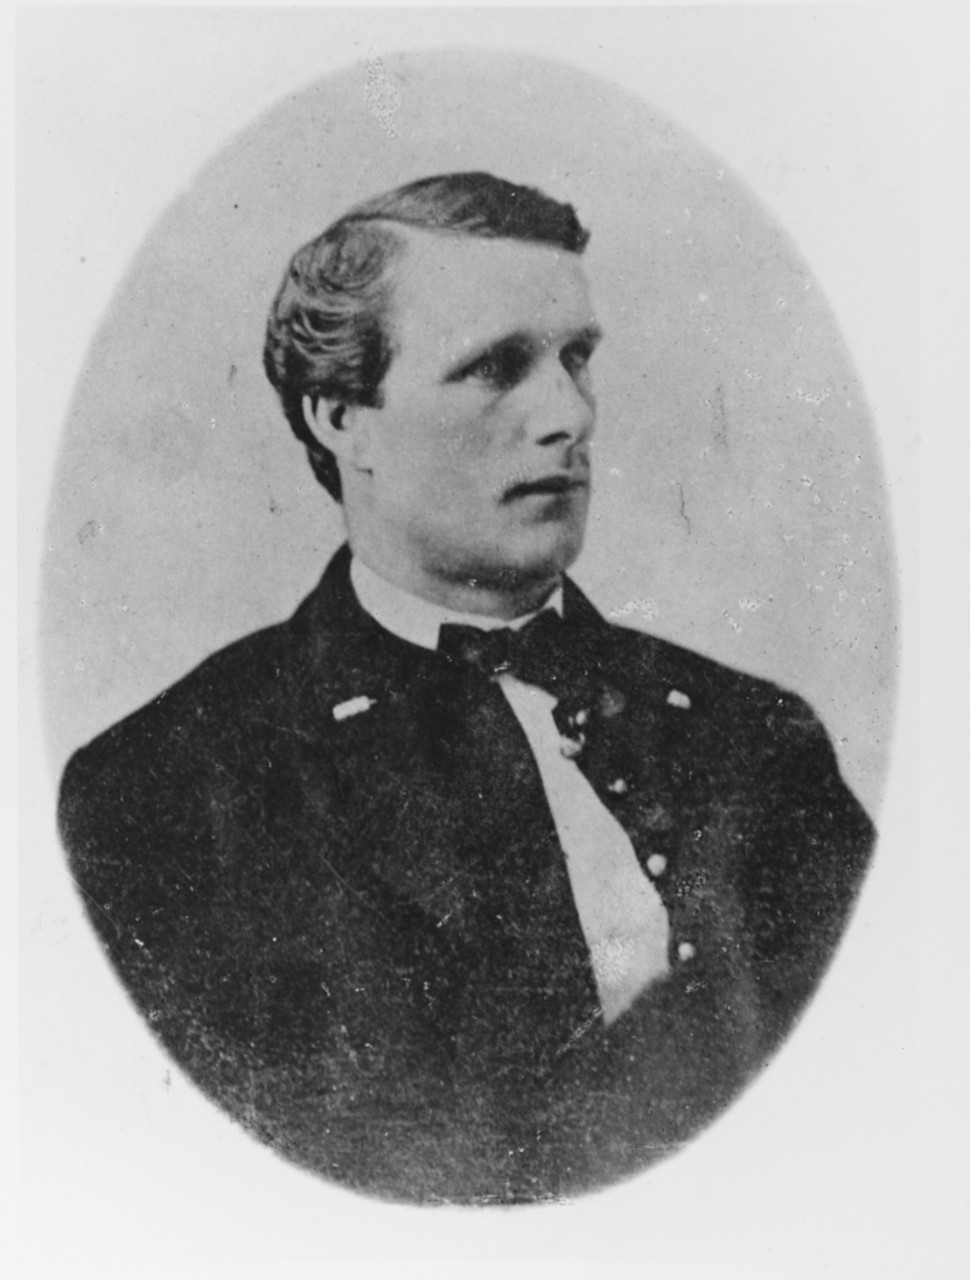 Photograph of a young naval officer